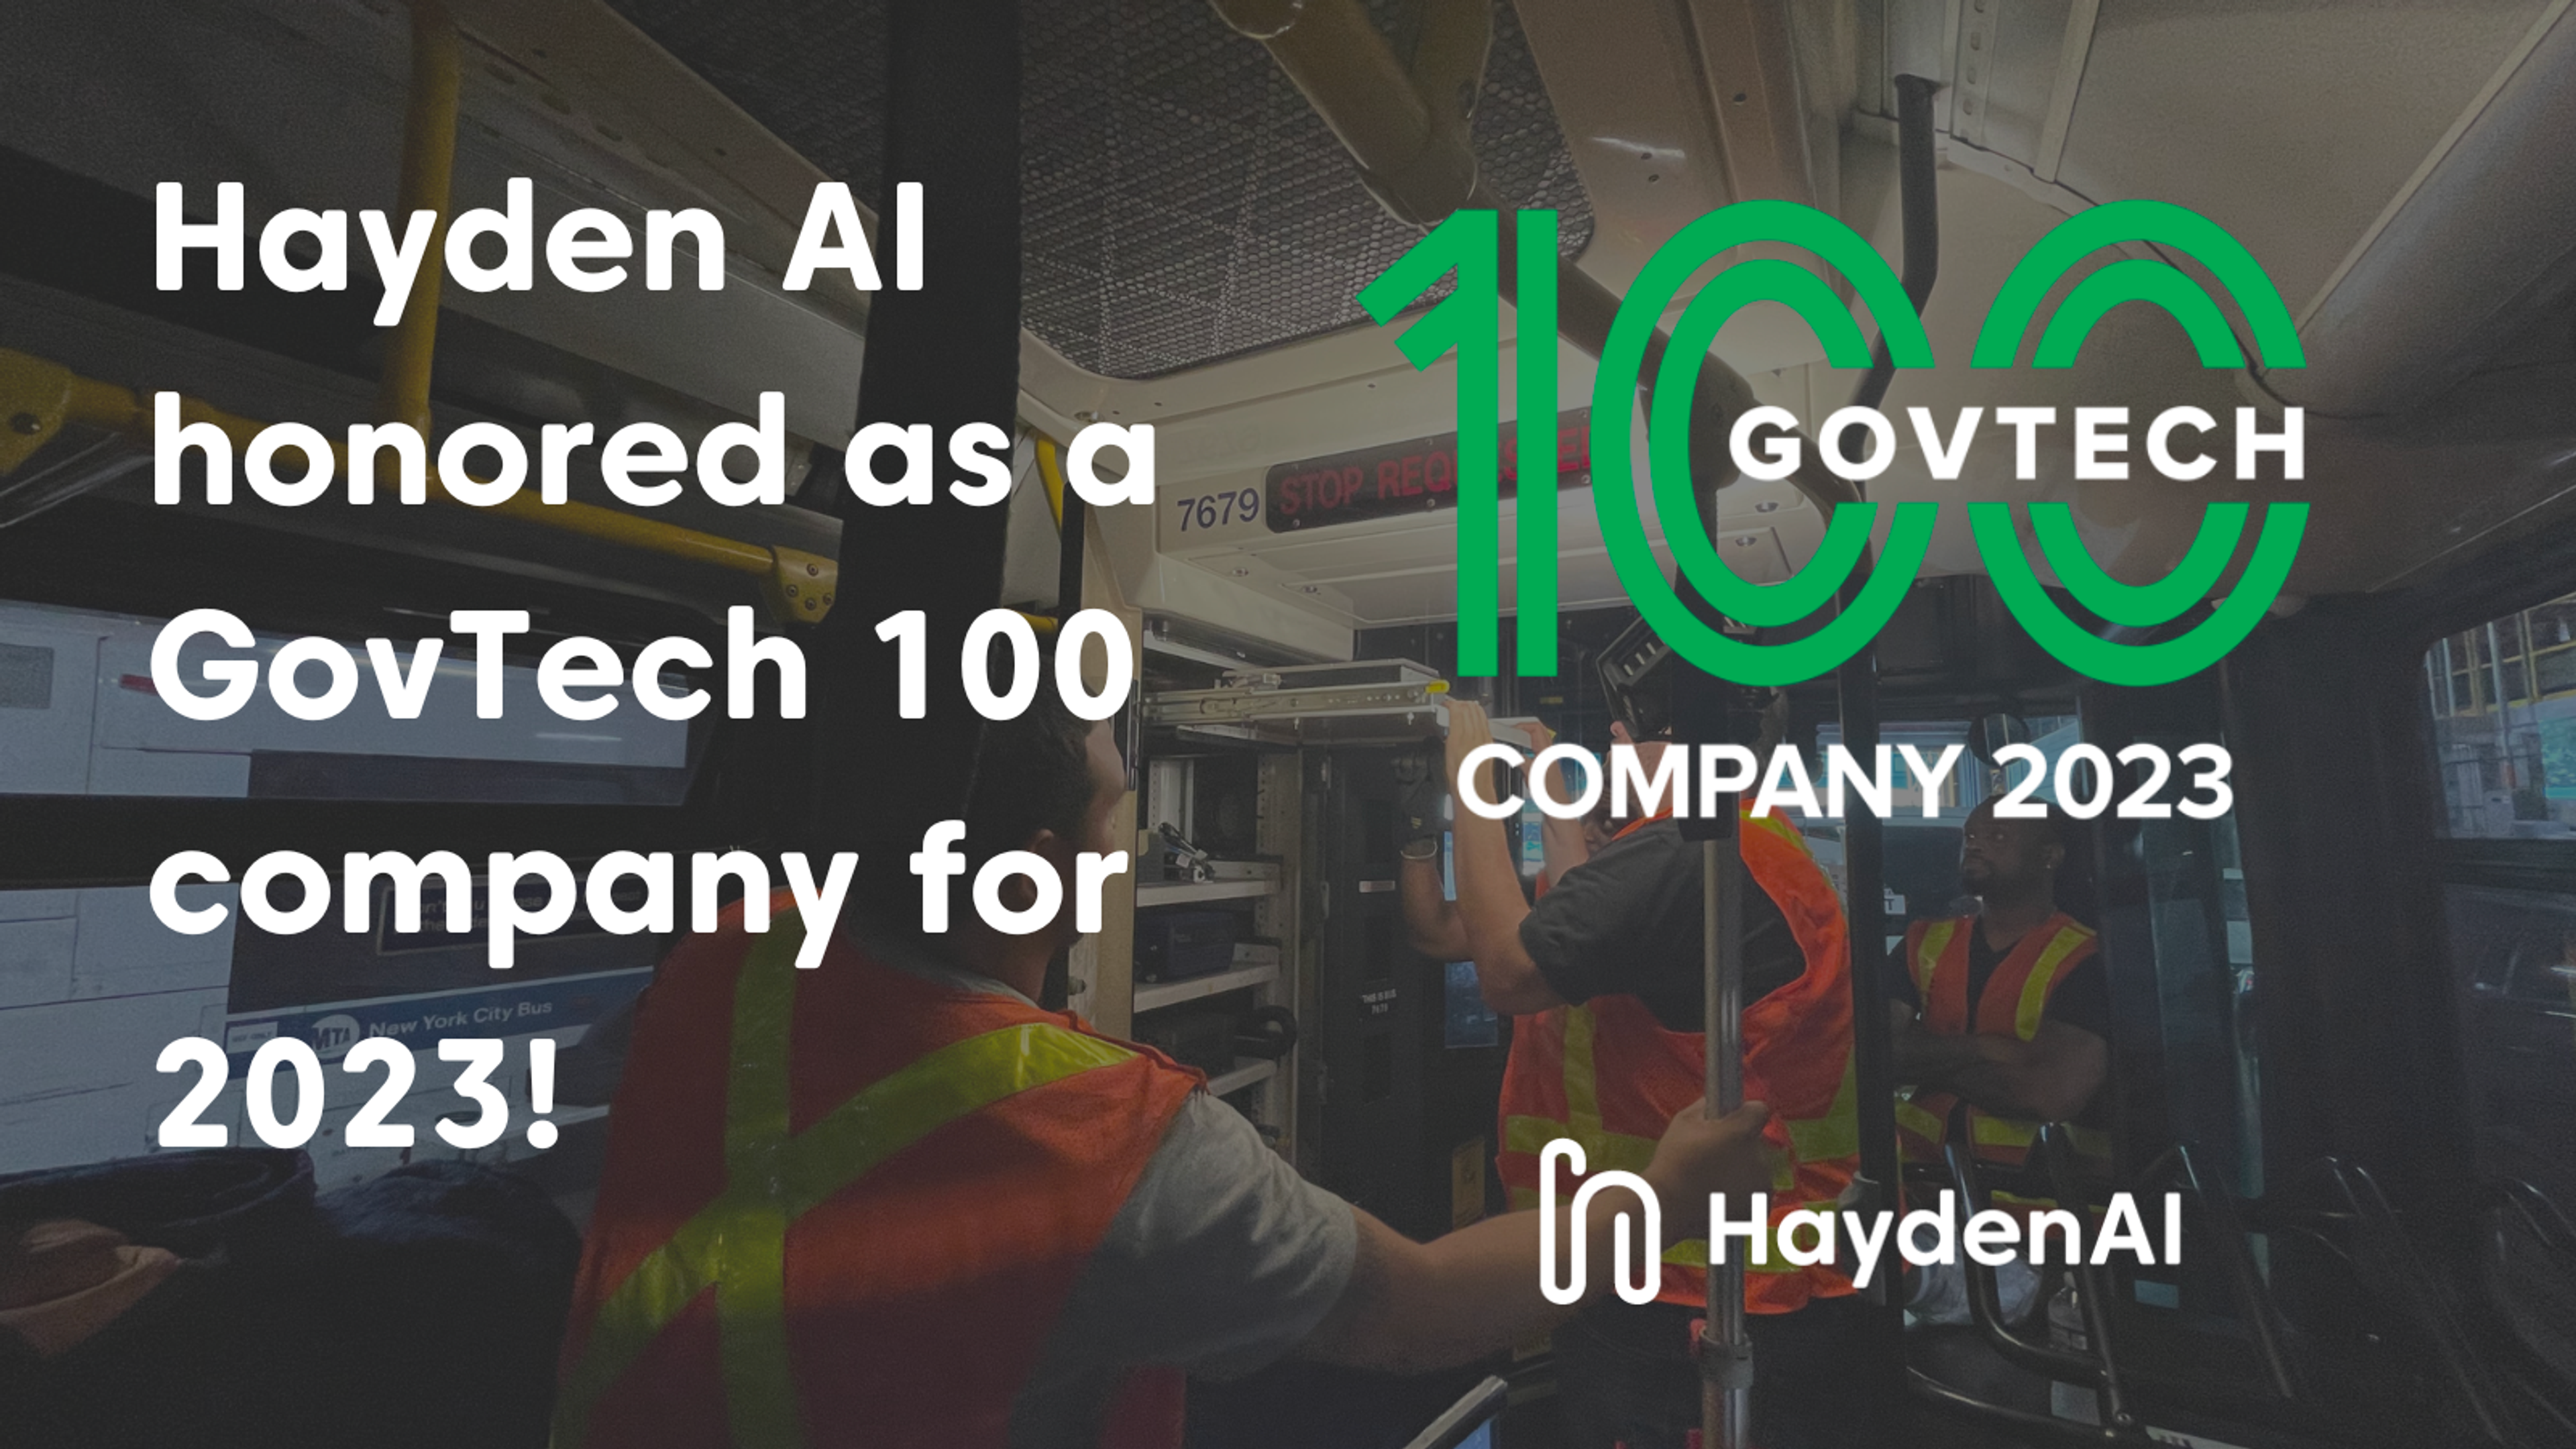 Hayden AI honored as a GovTech 100 company for 2023!